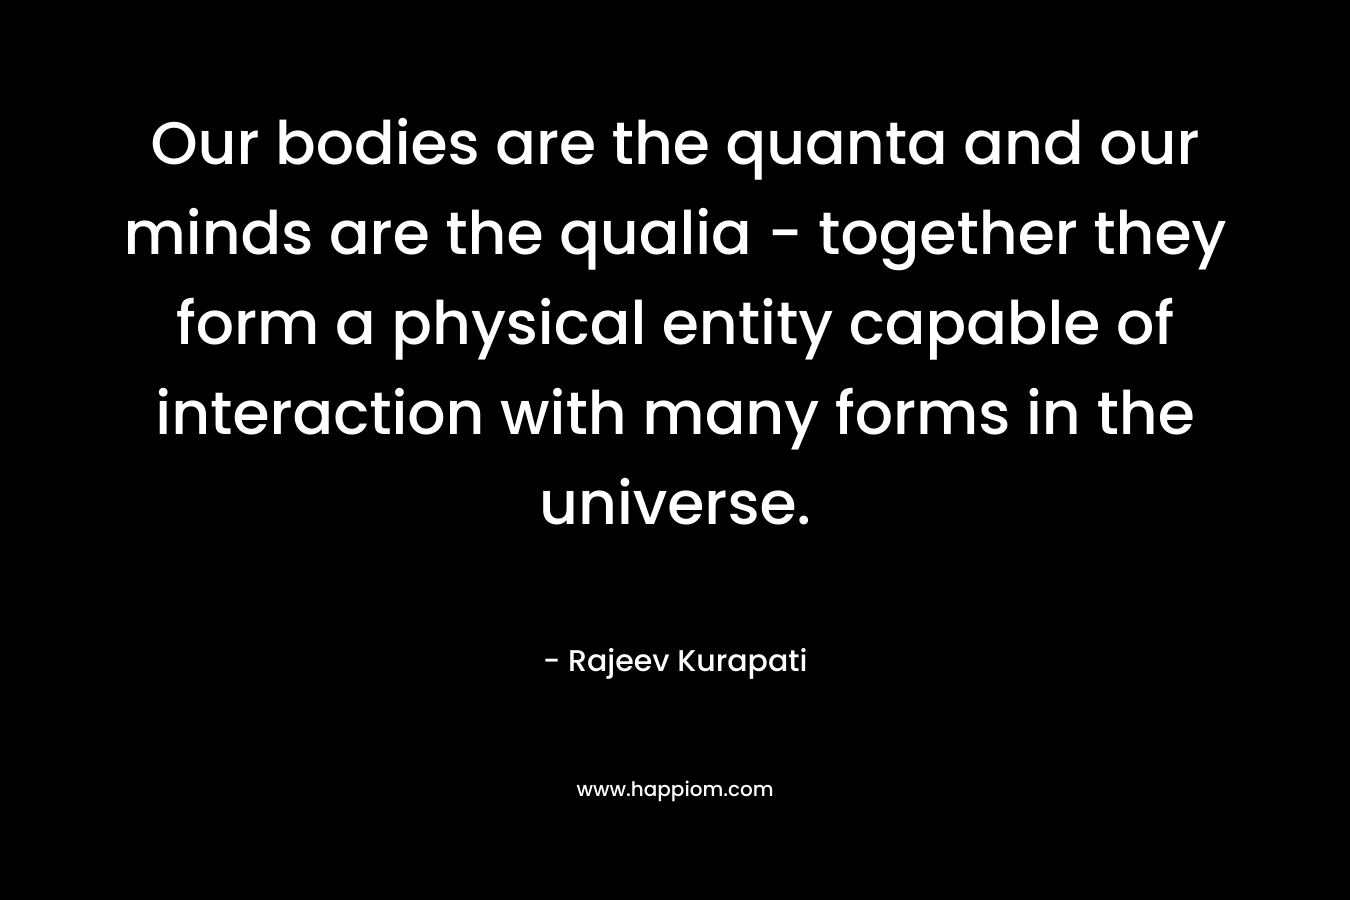 Our bodies are the quanta and our minds are the qualia - together they form a physical entity capable of interaction with many forms in the universe.